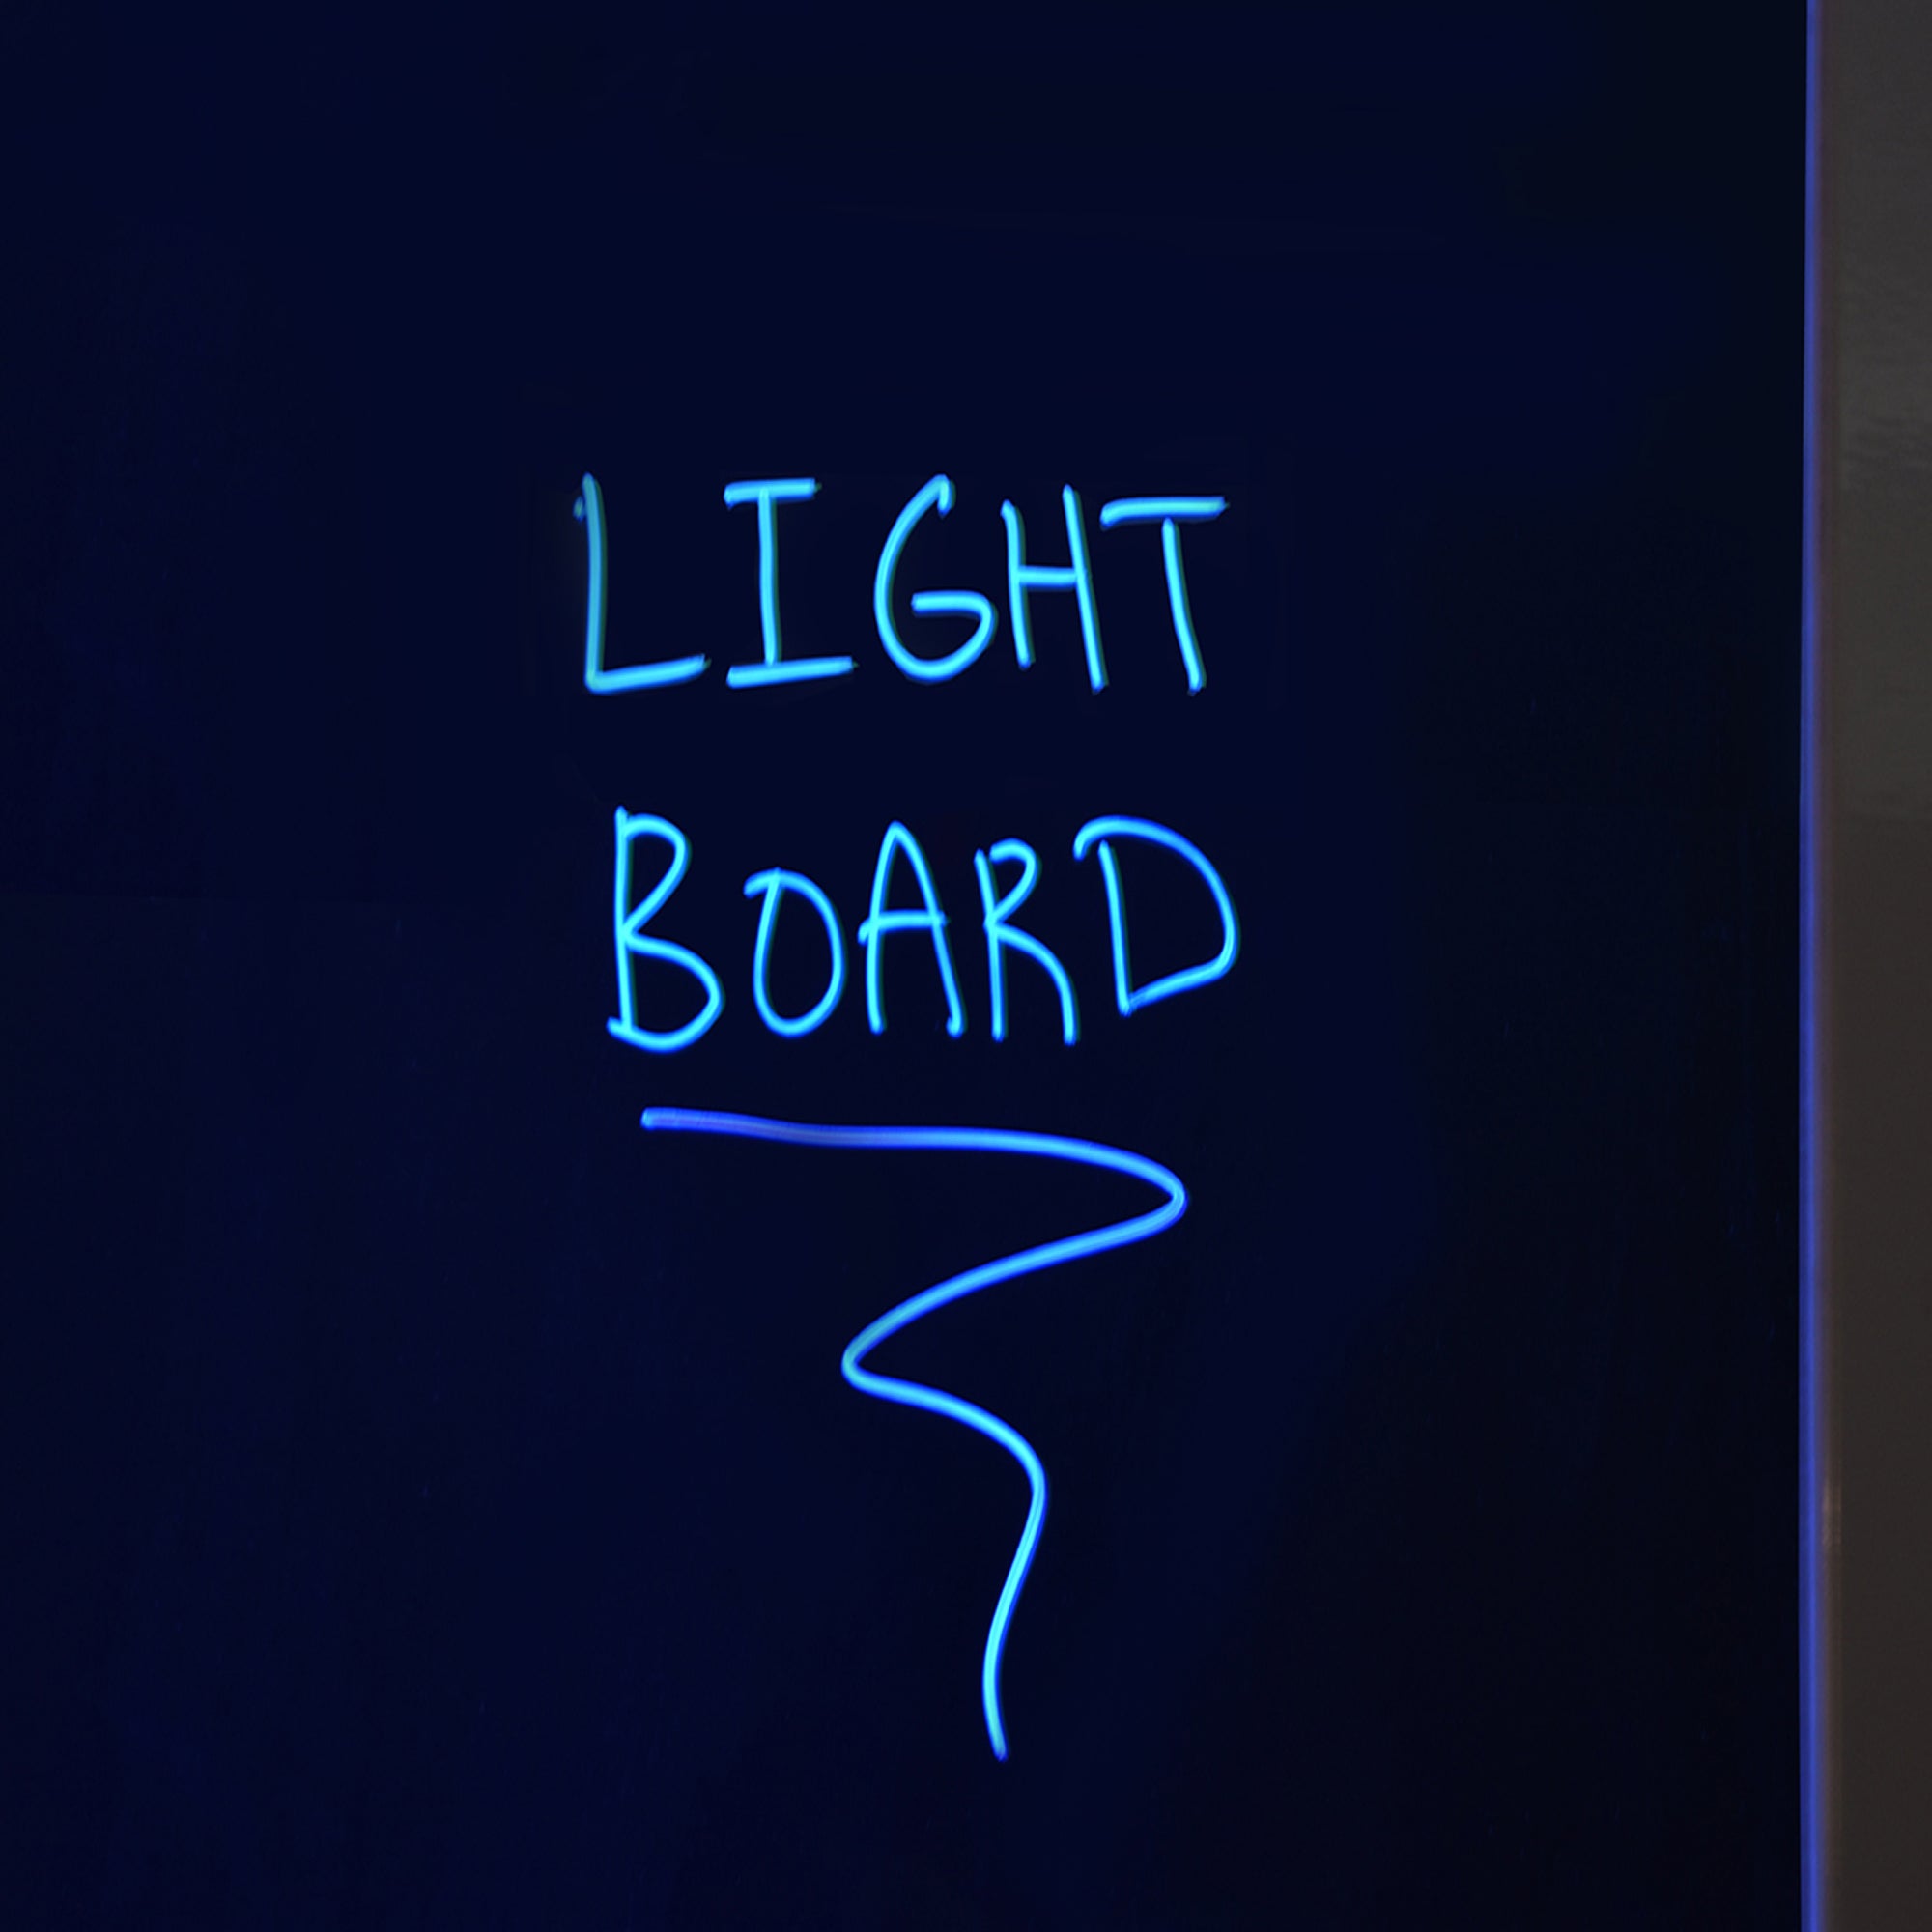 Light Board Text Example. Showing The blue Setting with writing.